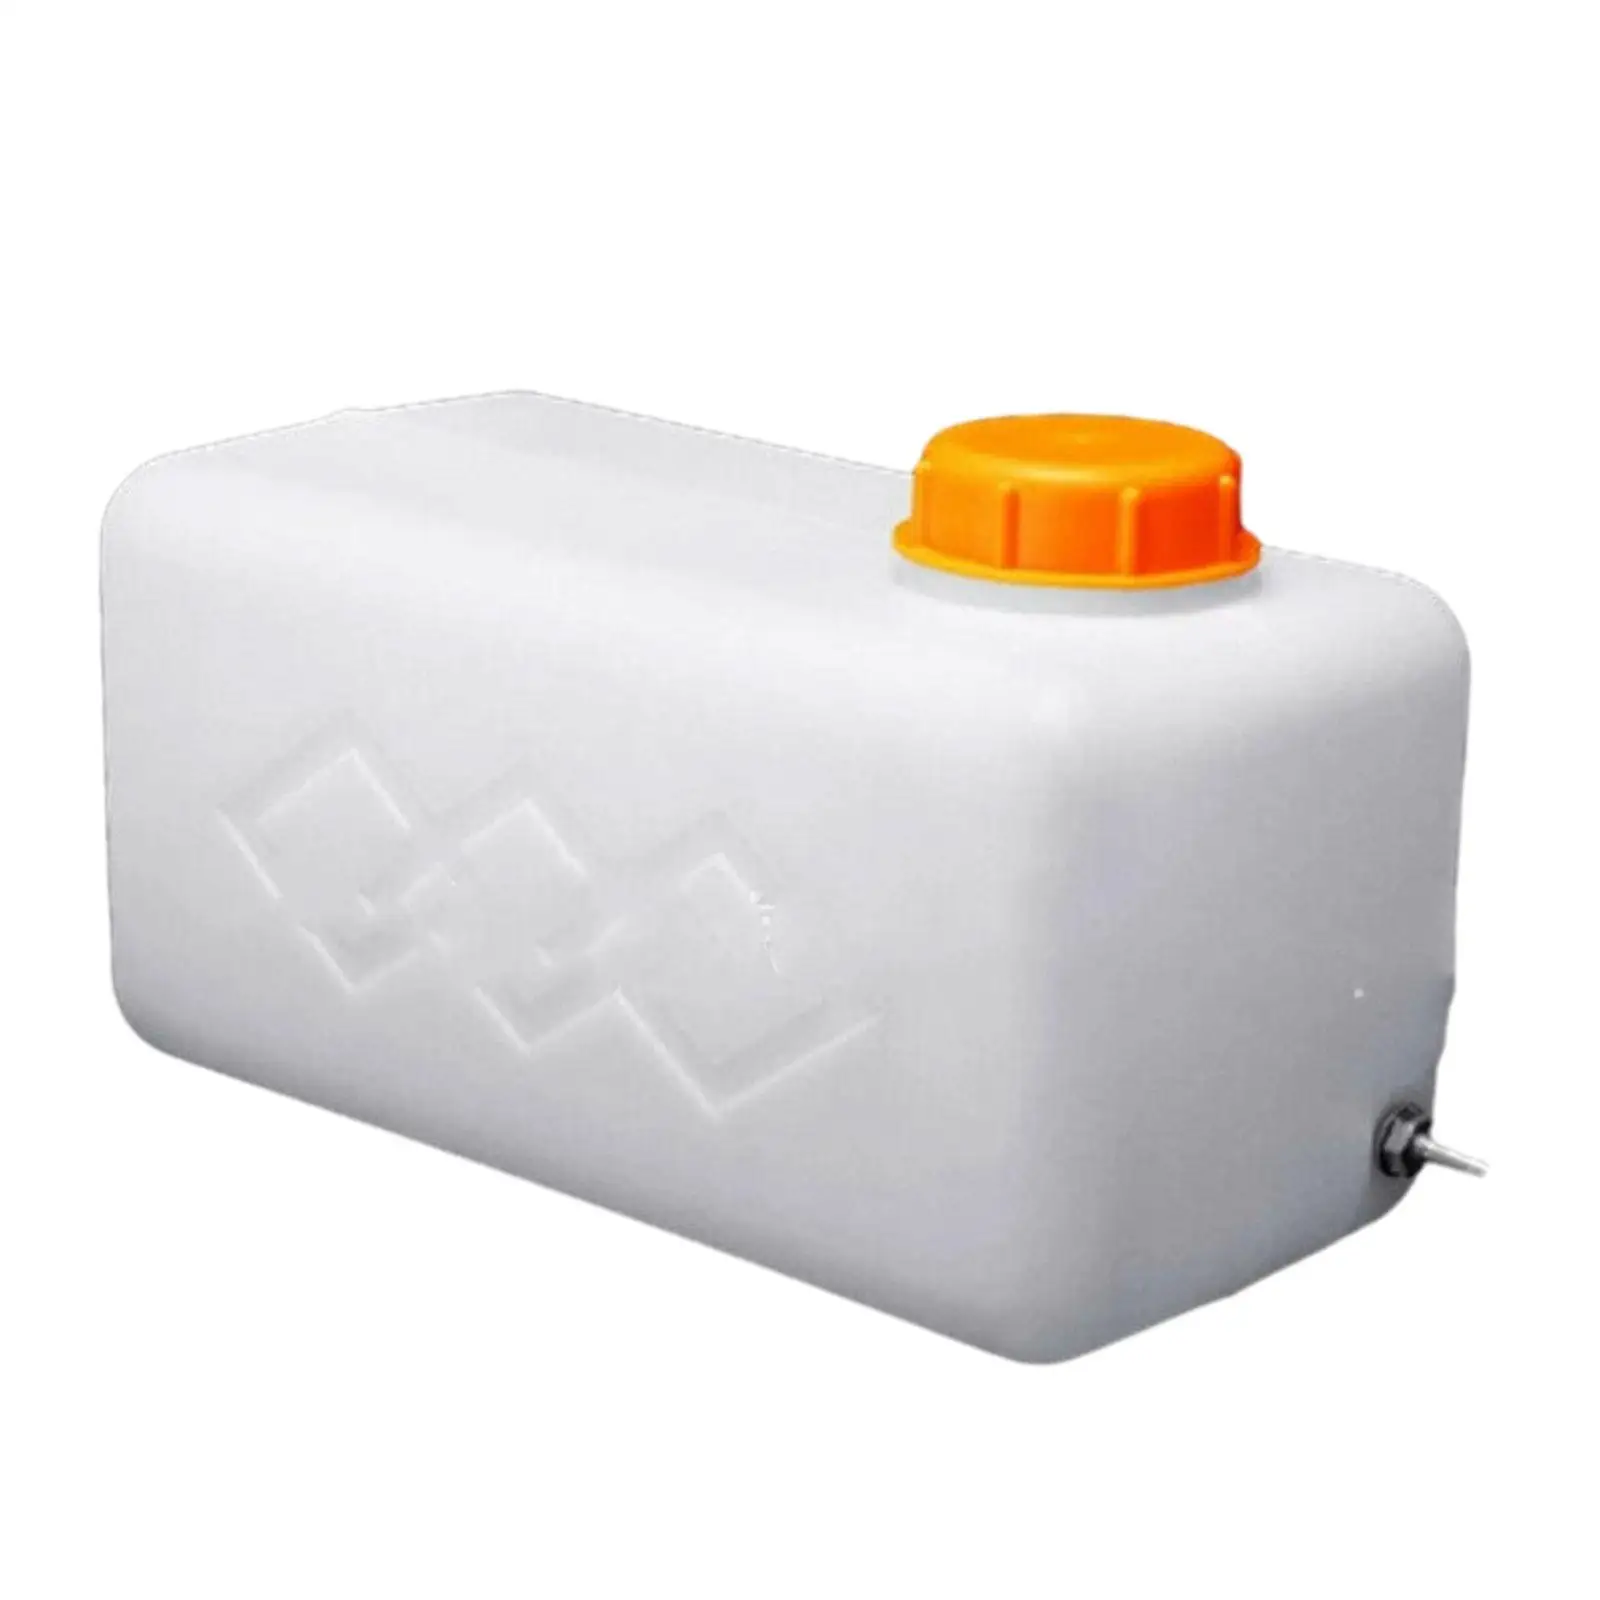 Parking Heater 5L Easy Installation Professional Sturdy Portable Car Truck Fuel Tank for Vehicle Truck Car Boat Accessory